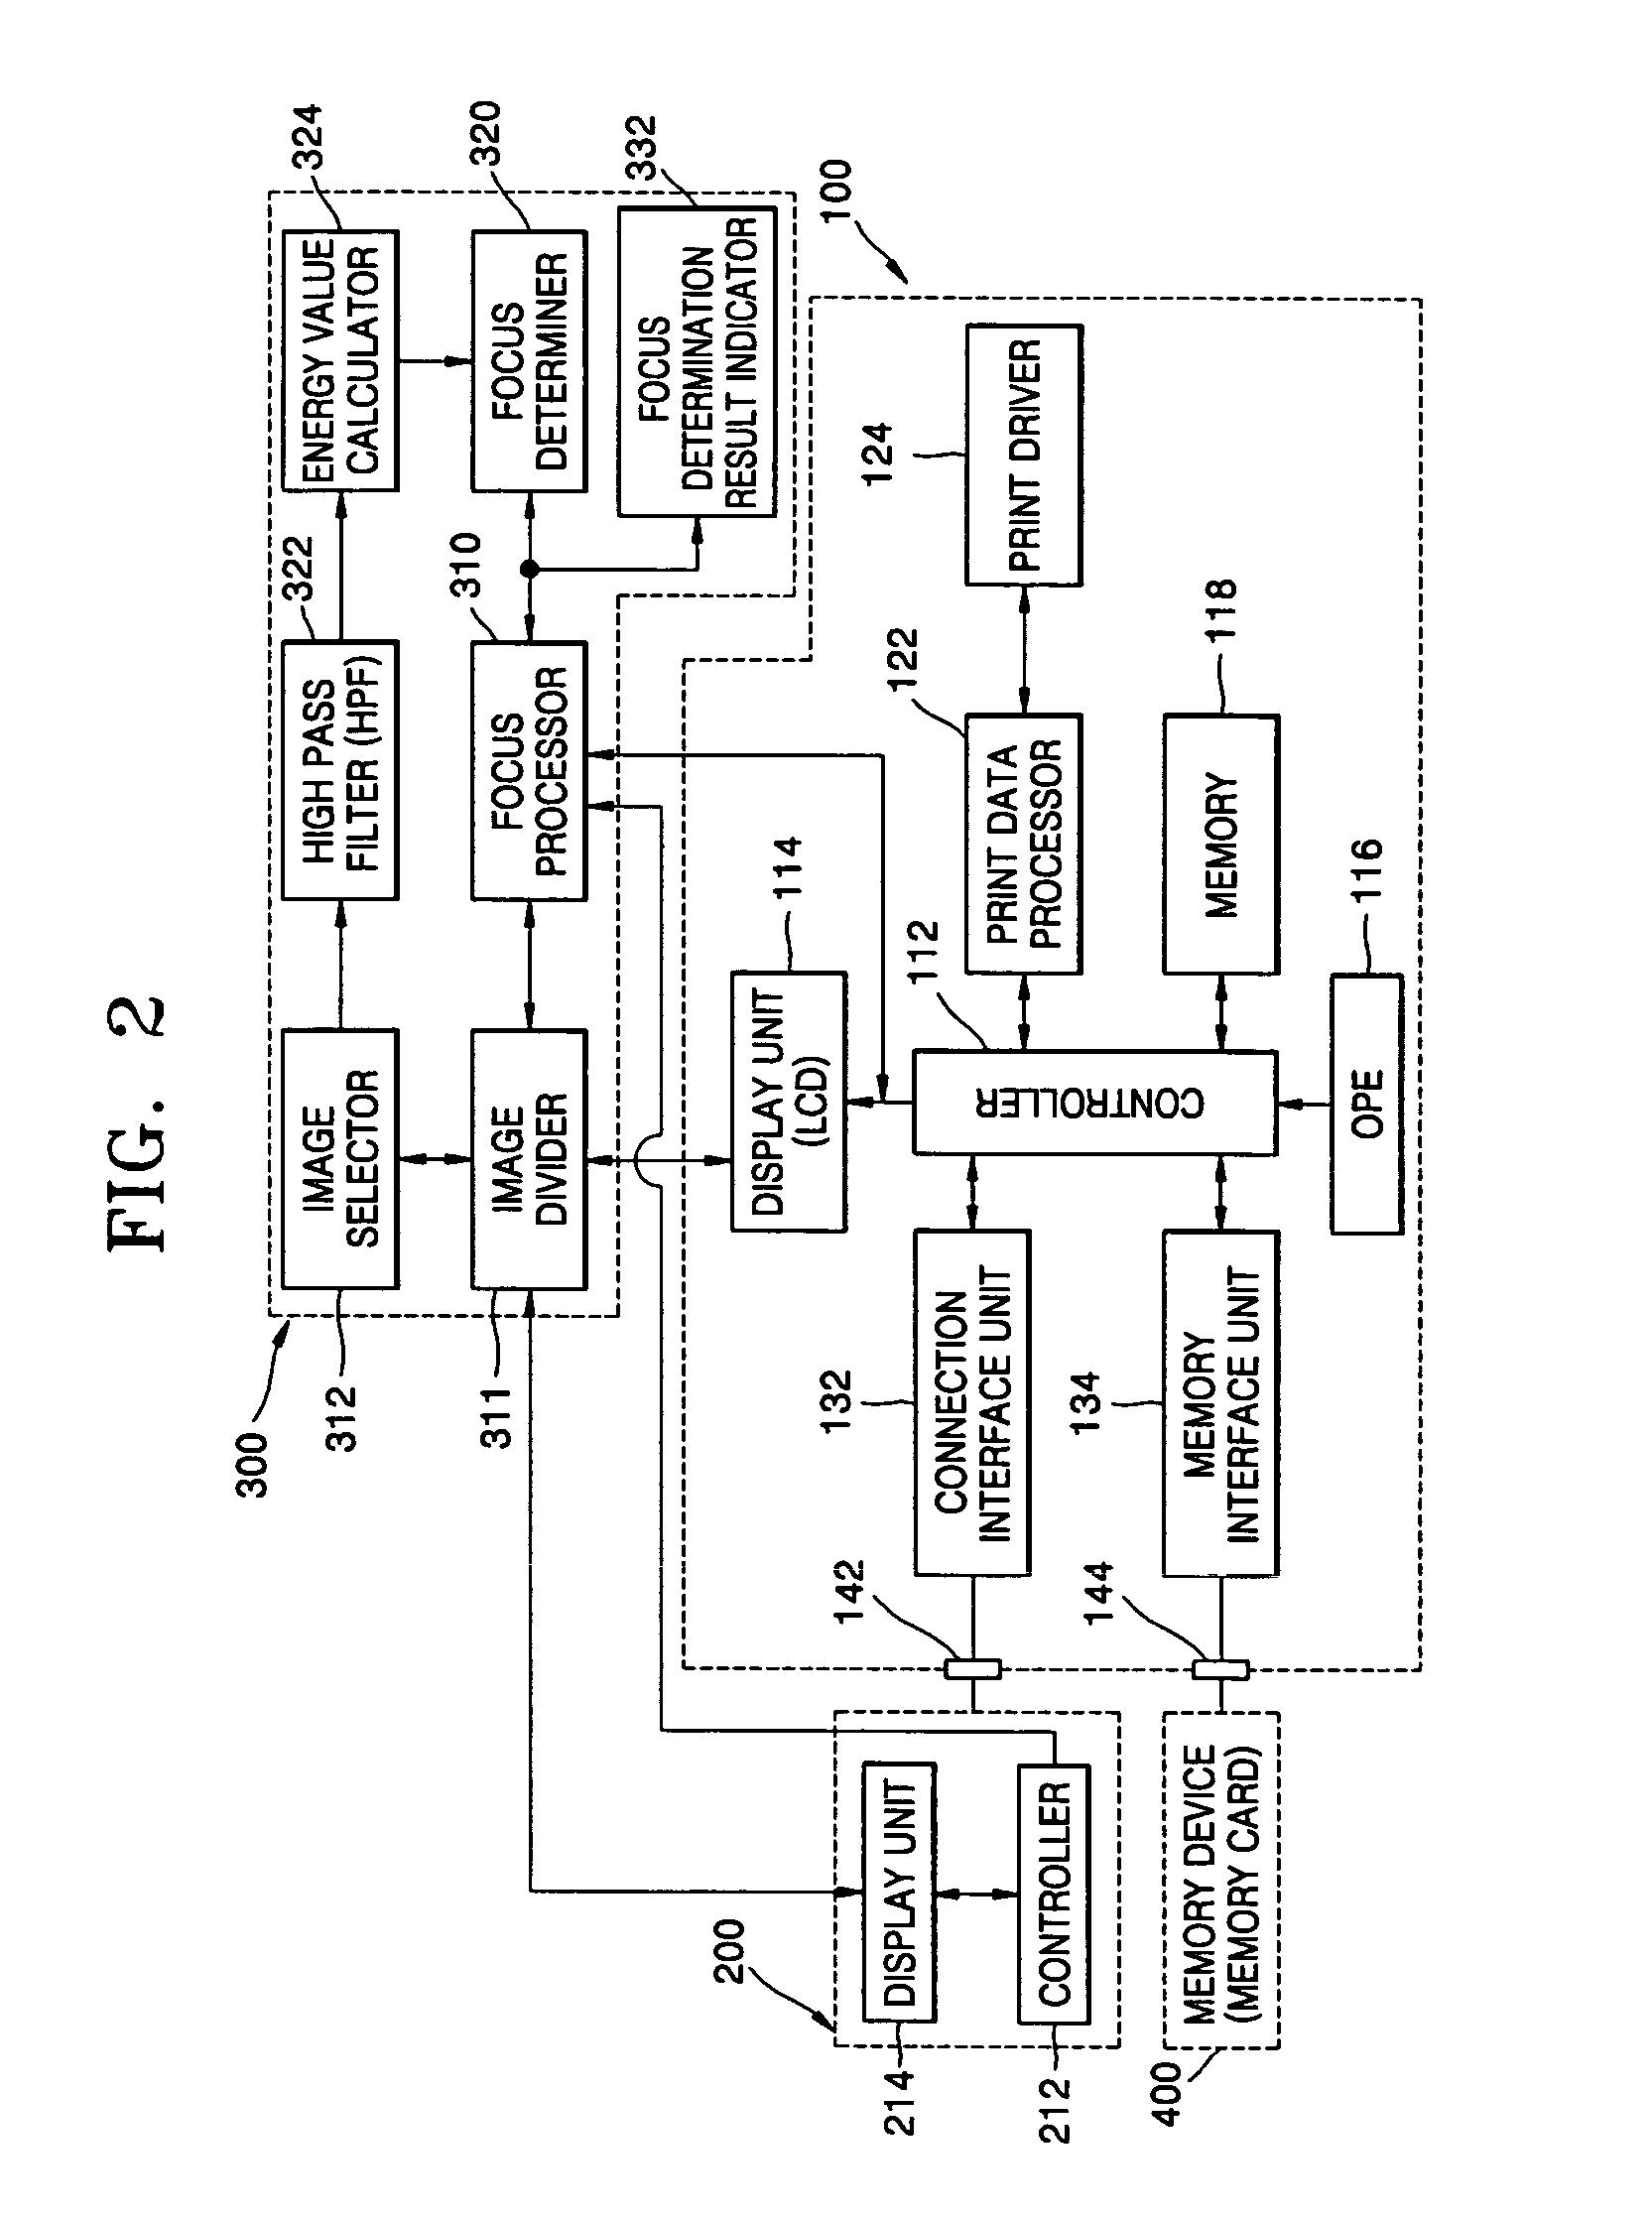 Image processing device and method, and image forming apparatus and image capturing apparatus including an image processing device